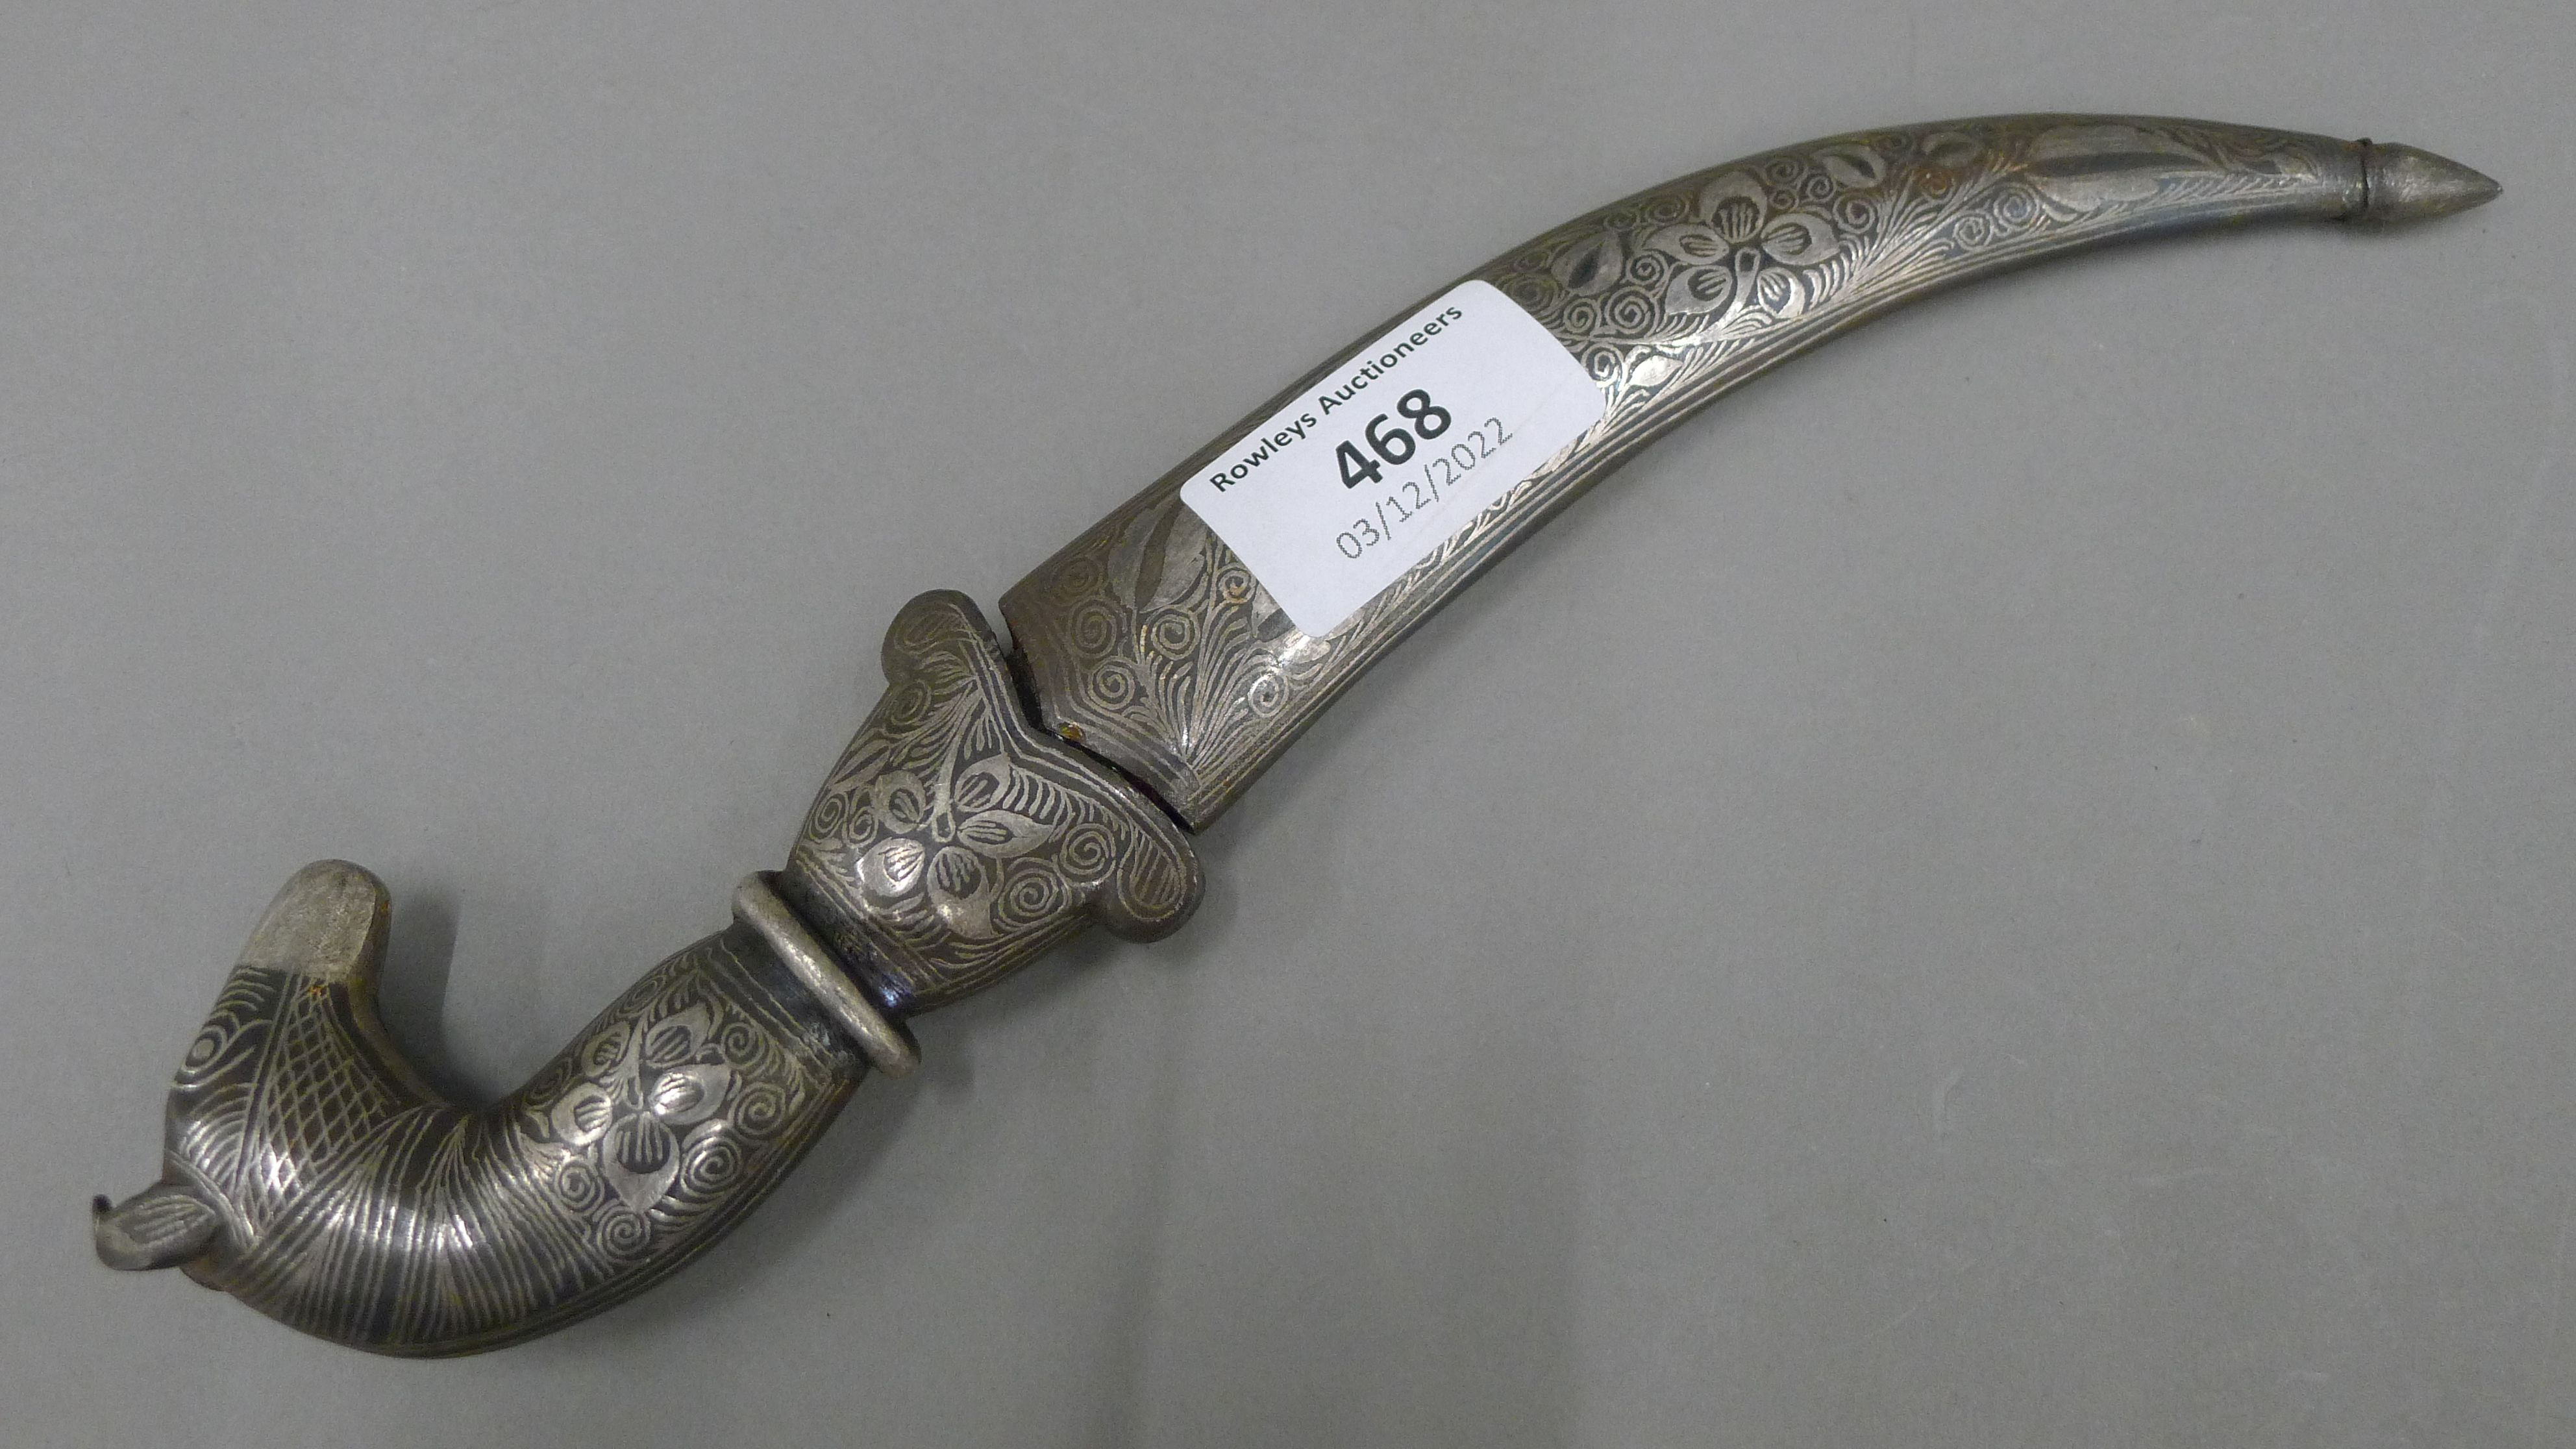 A 19th century Persian knife, the steel scabbard and grip inlaid with silver,